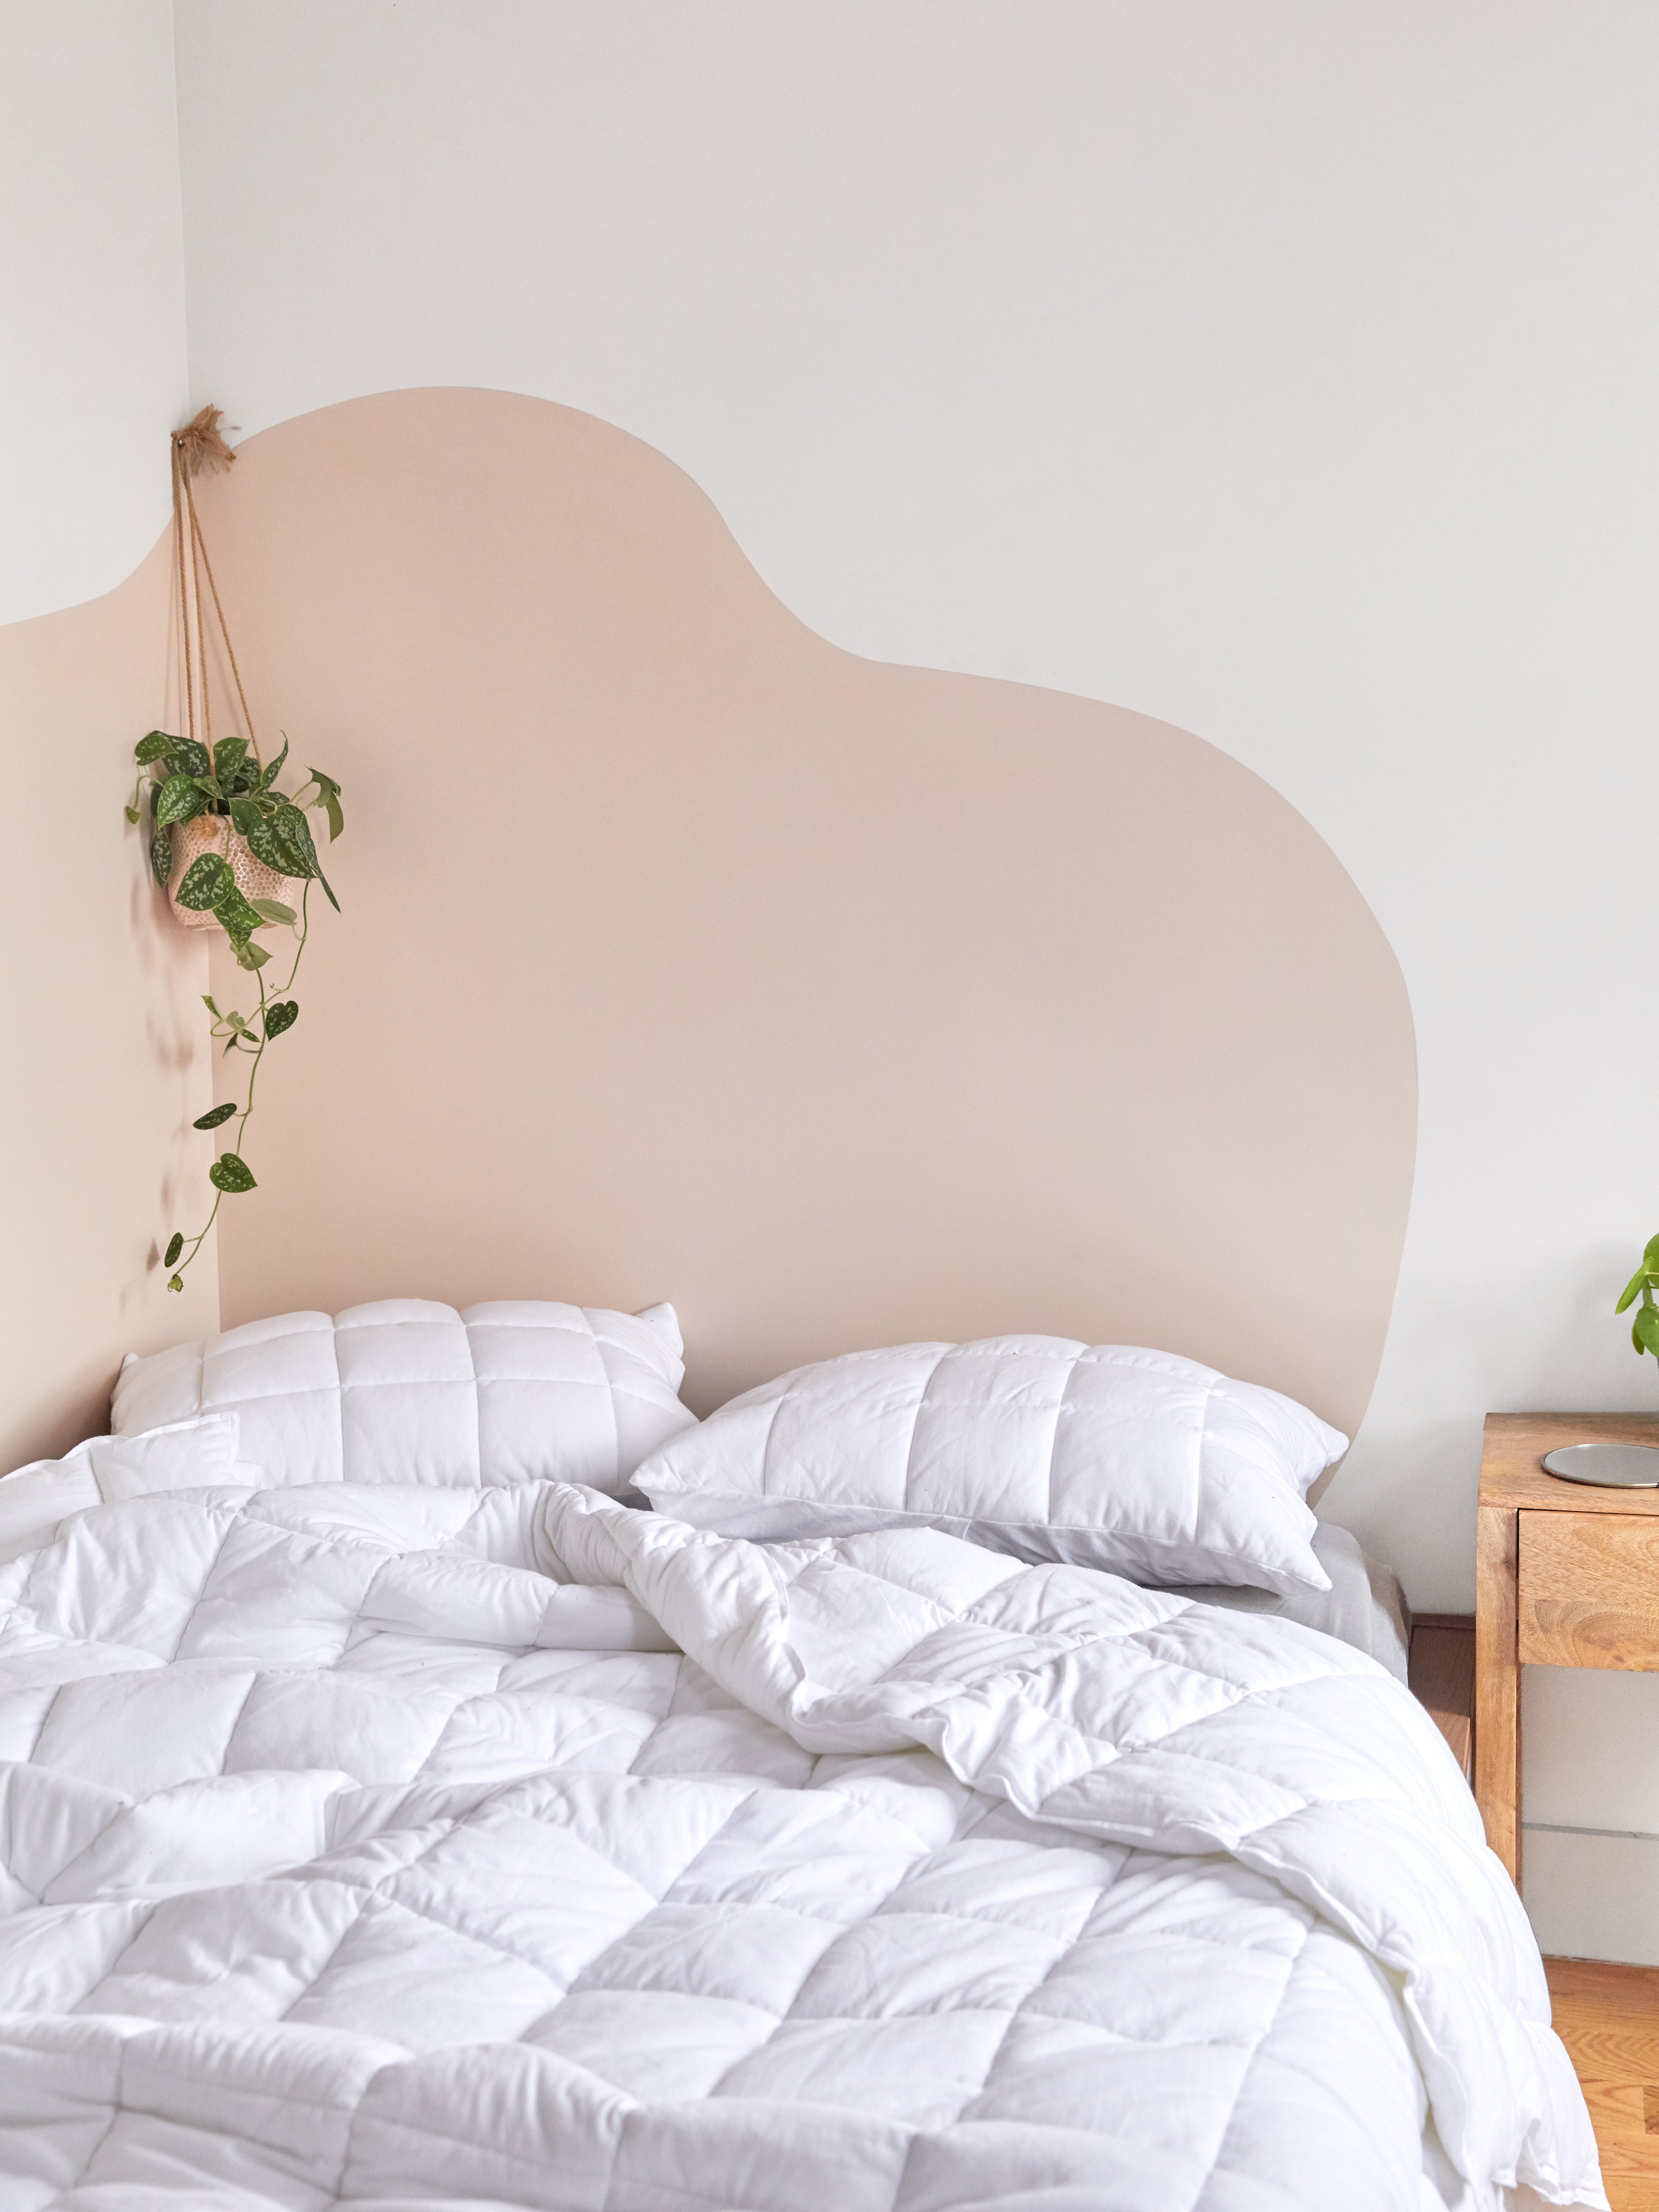 Urban Outfitters Has Convinced Us to DIY a Headboard With Its New Paint